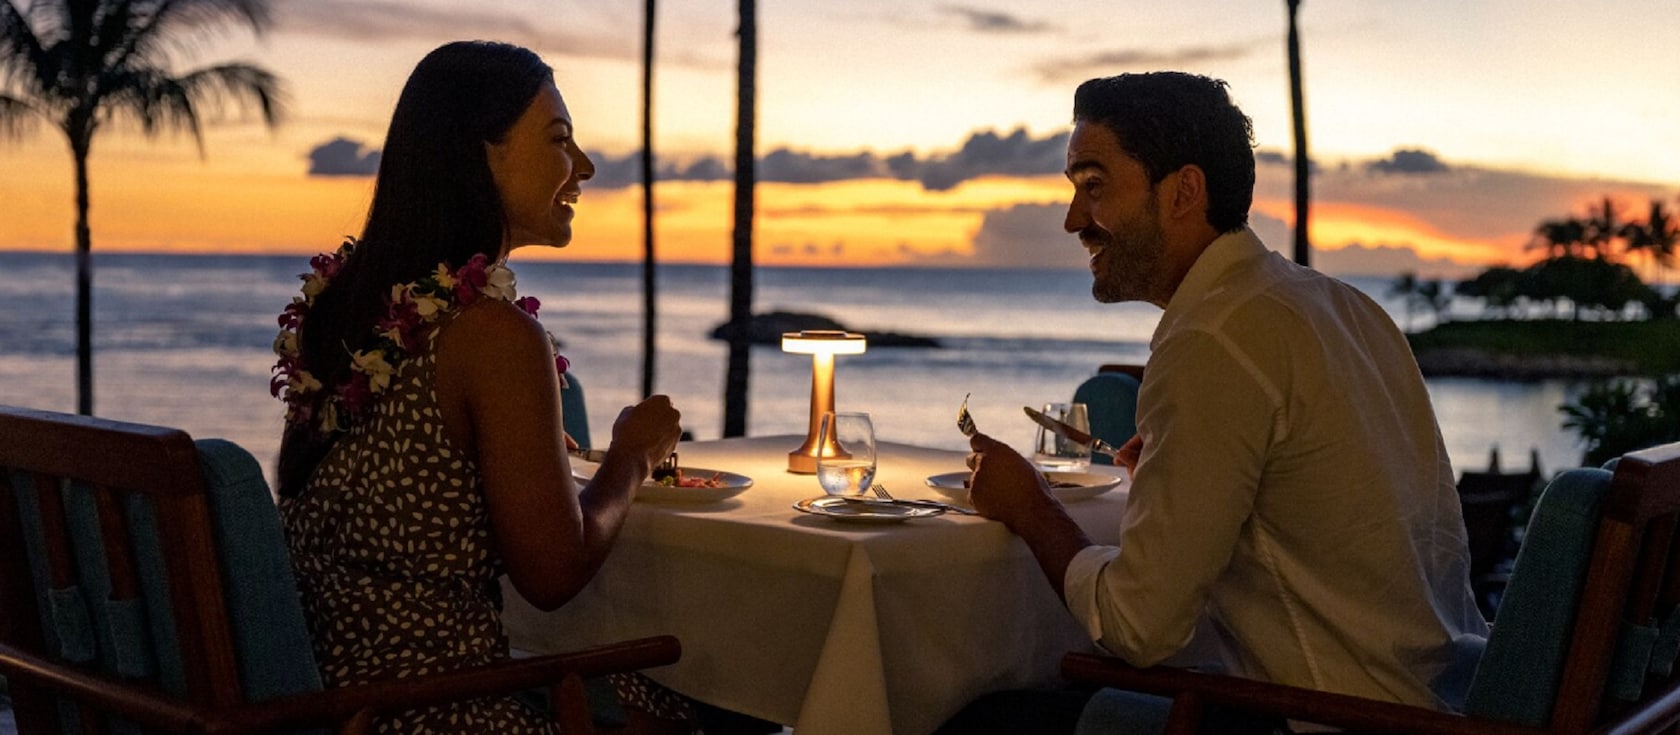 A man and woman sit outside at a table by the ocean, enjoying a romantic dinner at sunset